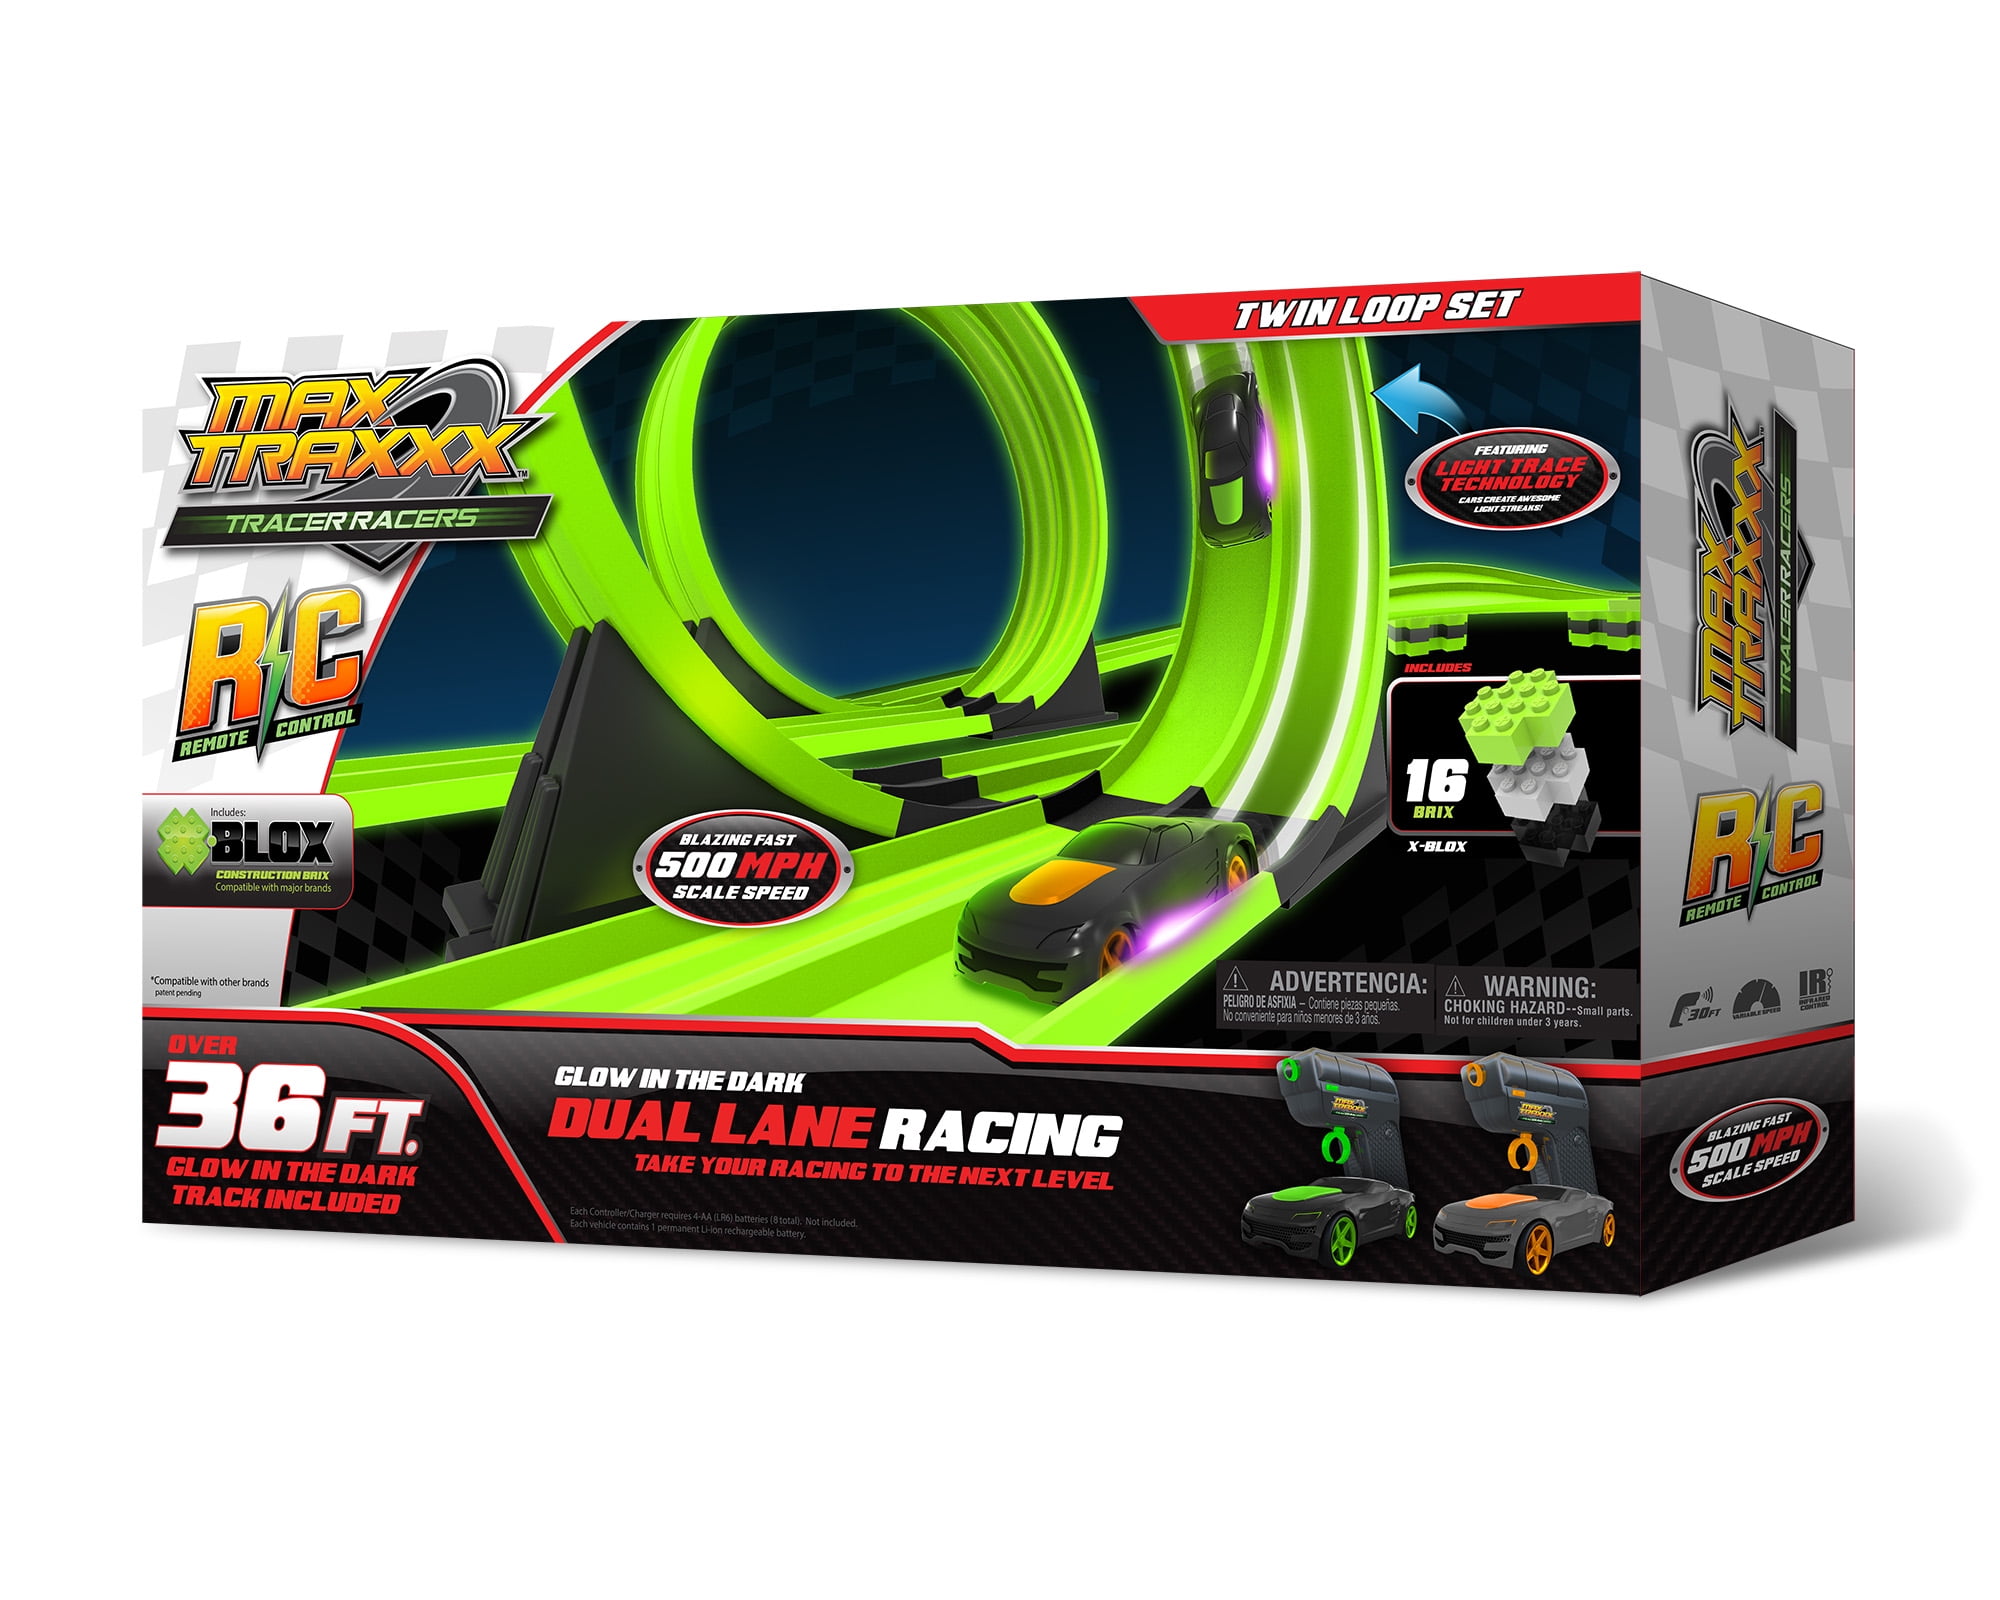 Tracer Race Car Track Dual Loop Gravity Drive Remote Control Sets Glowing Toy 